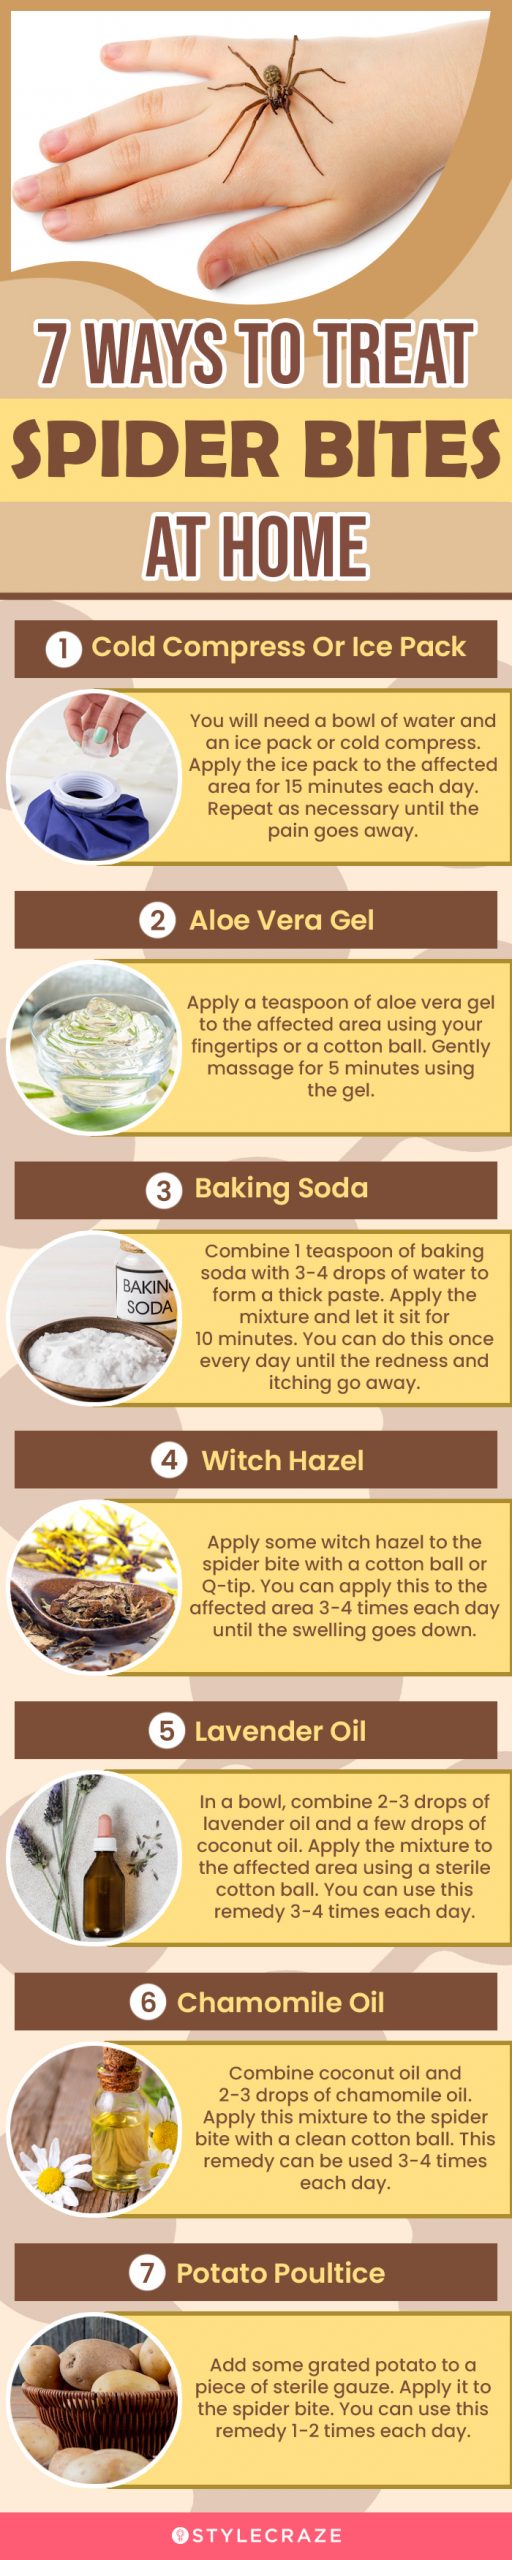 7 ways to treat spider bites at home (infographic)